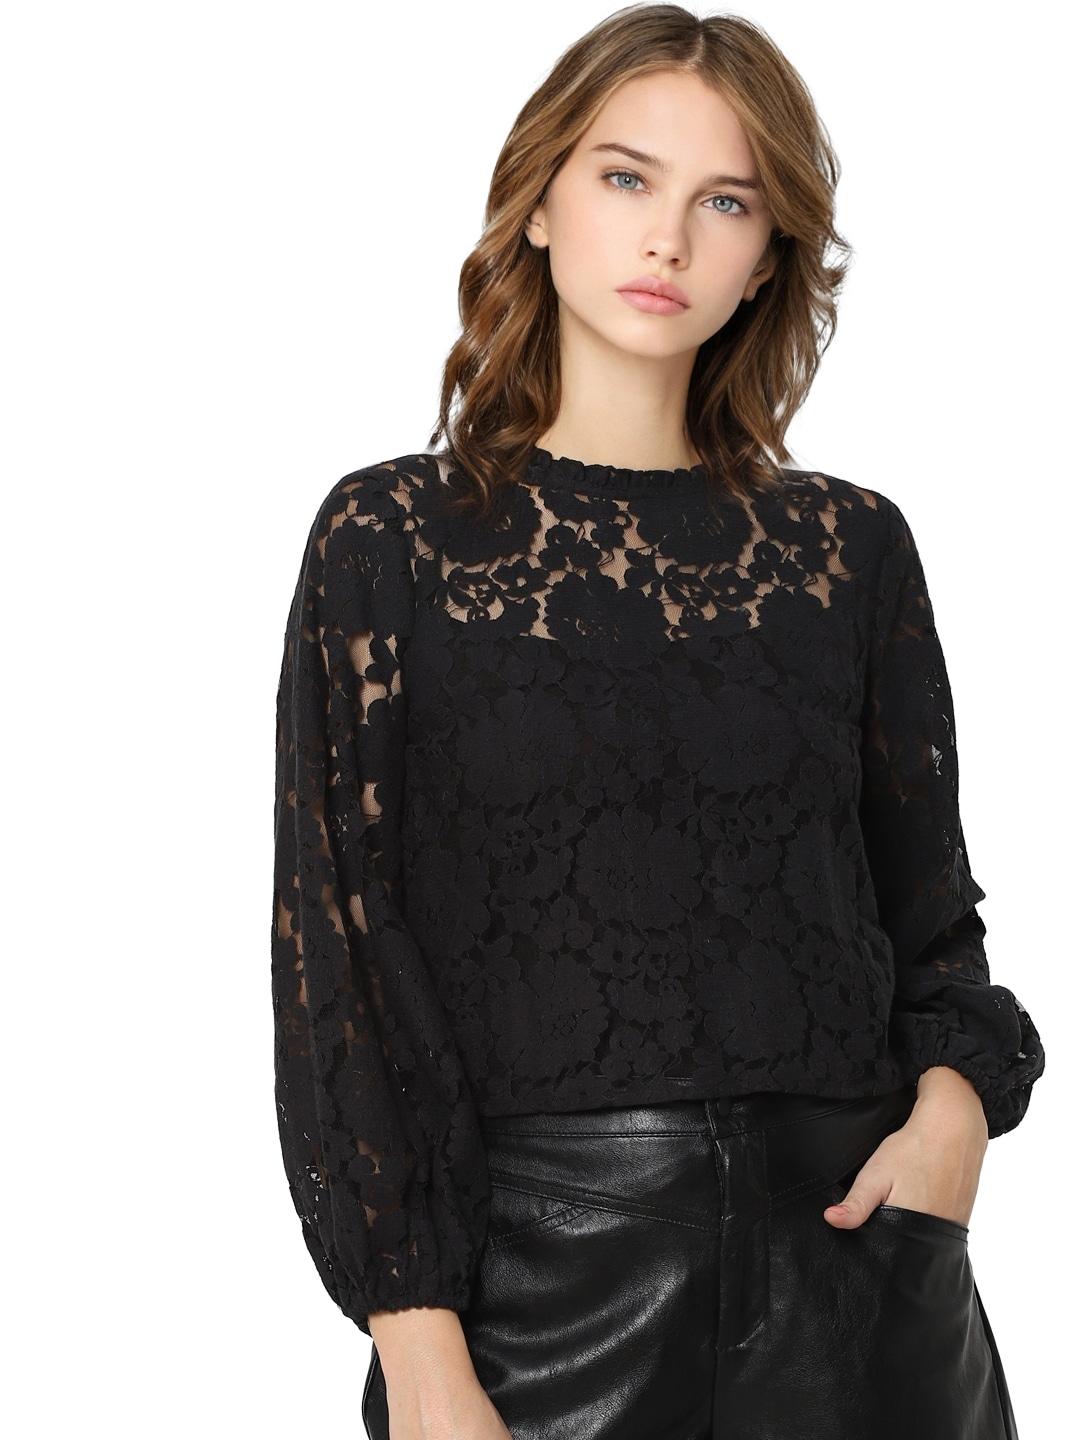 ONLY Black Self Design Lace Inserts Top